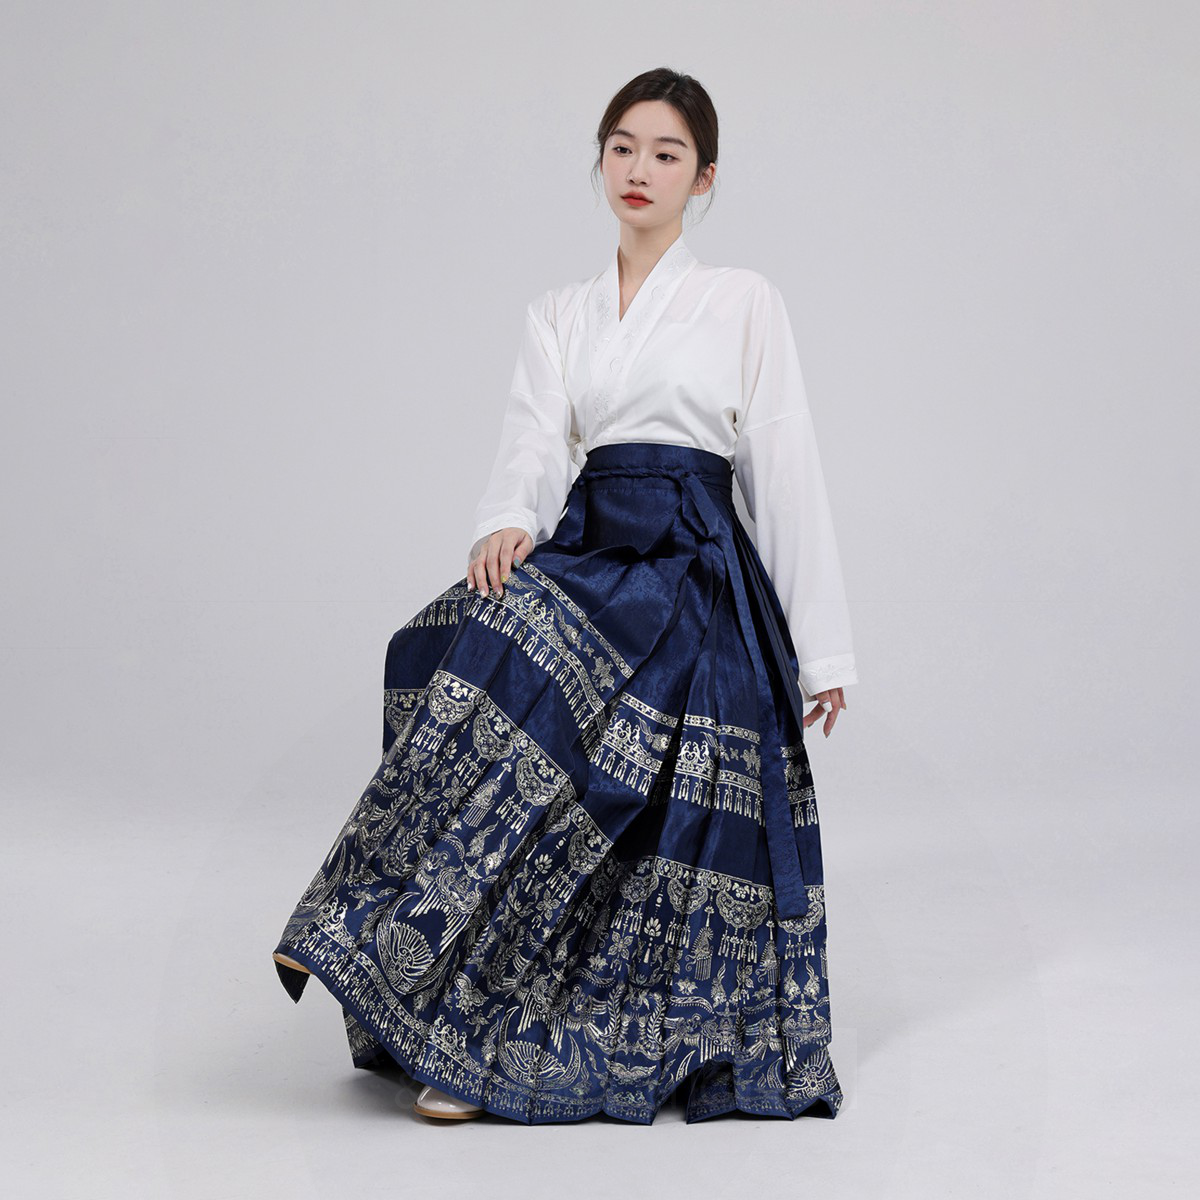 Zehui Ni wins Silver at the prestigious A' Costume and Heritage Wear Design Award with Hmong Silver Heritage Skirt.